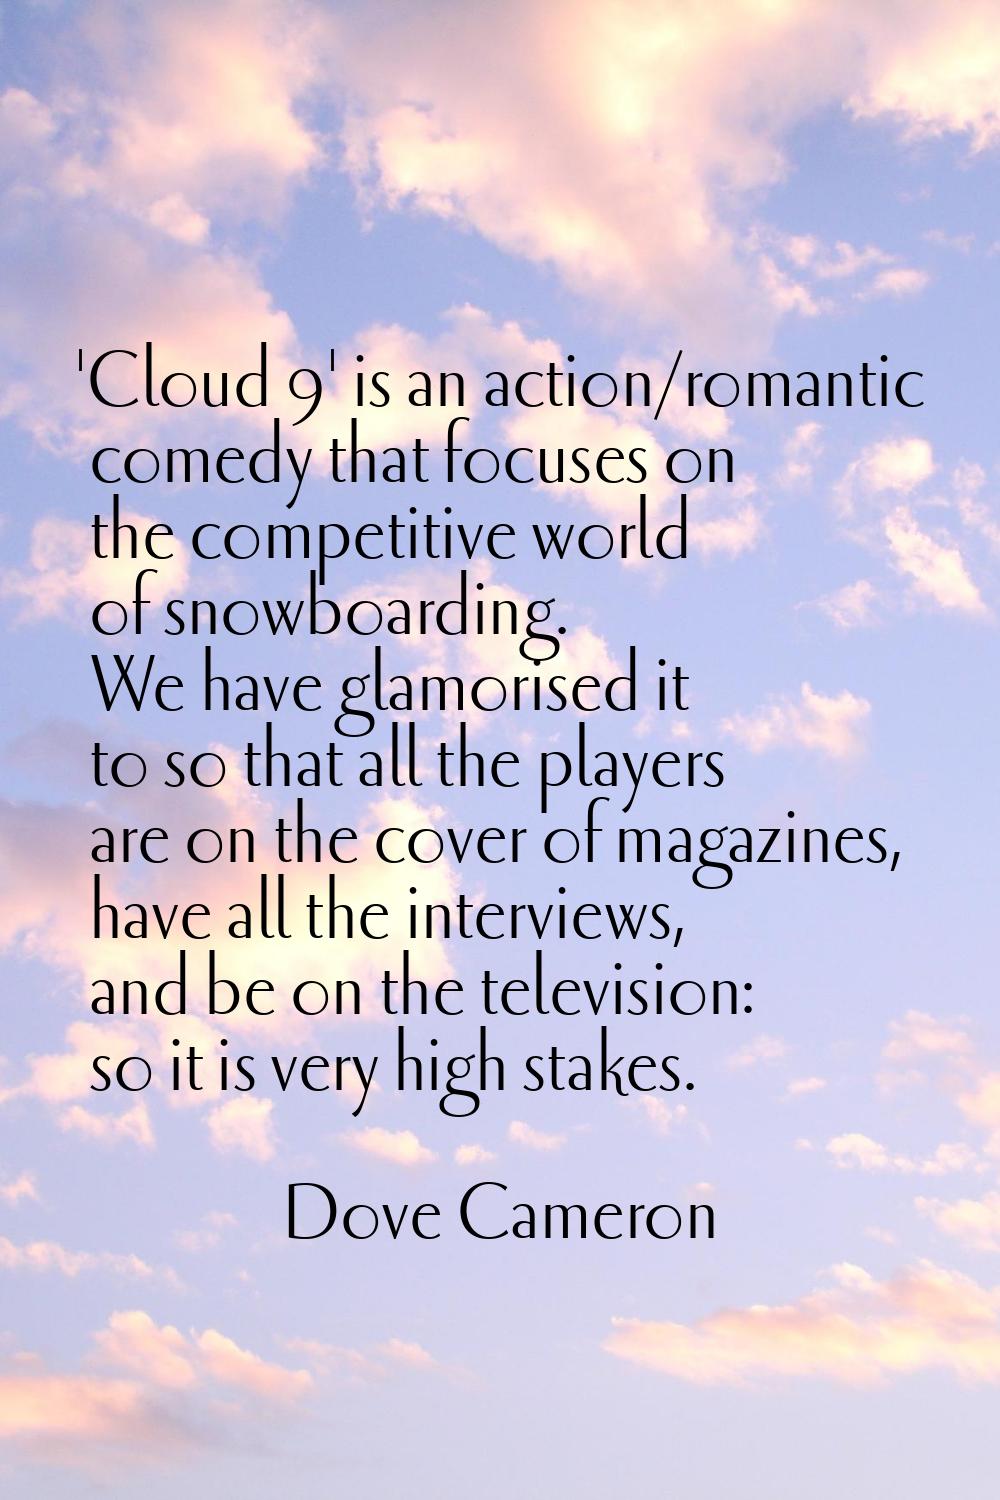 'Cloud 9' is an action/romantic comedy that focuses on the competitive world of snowboarding. We ha